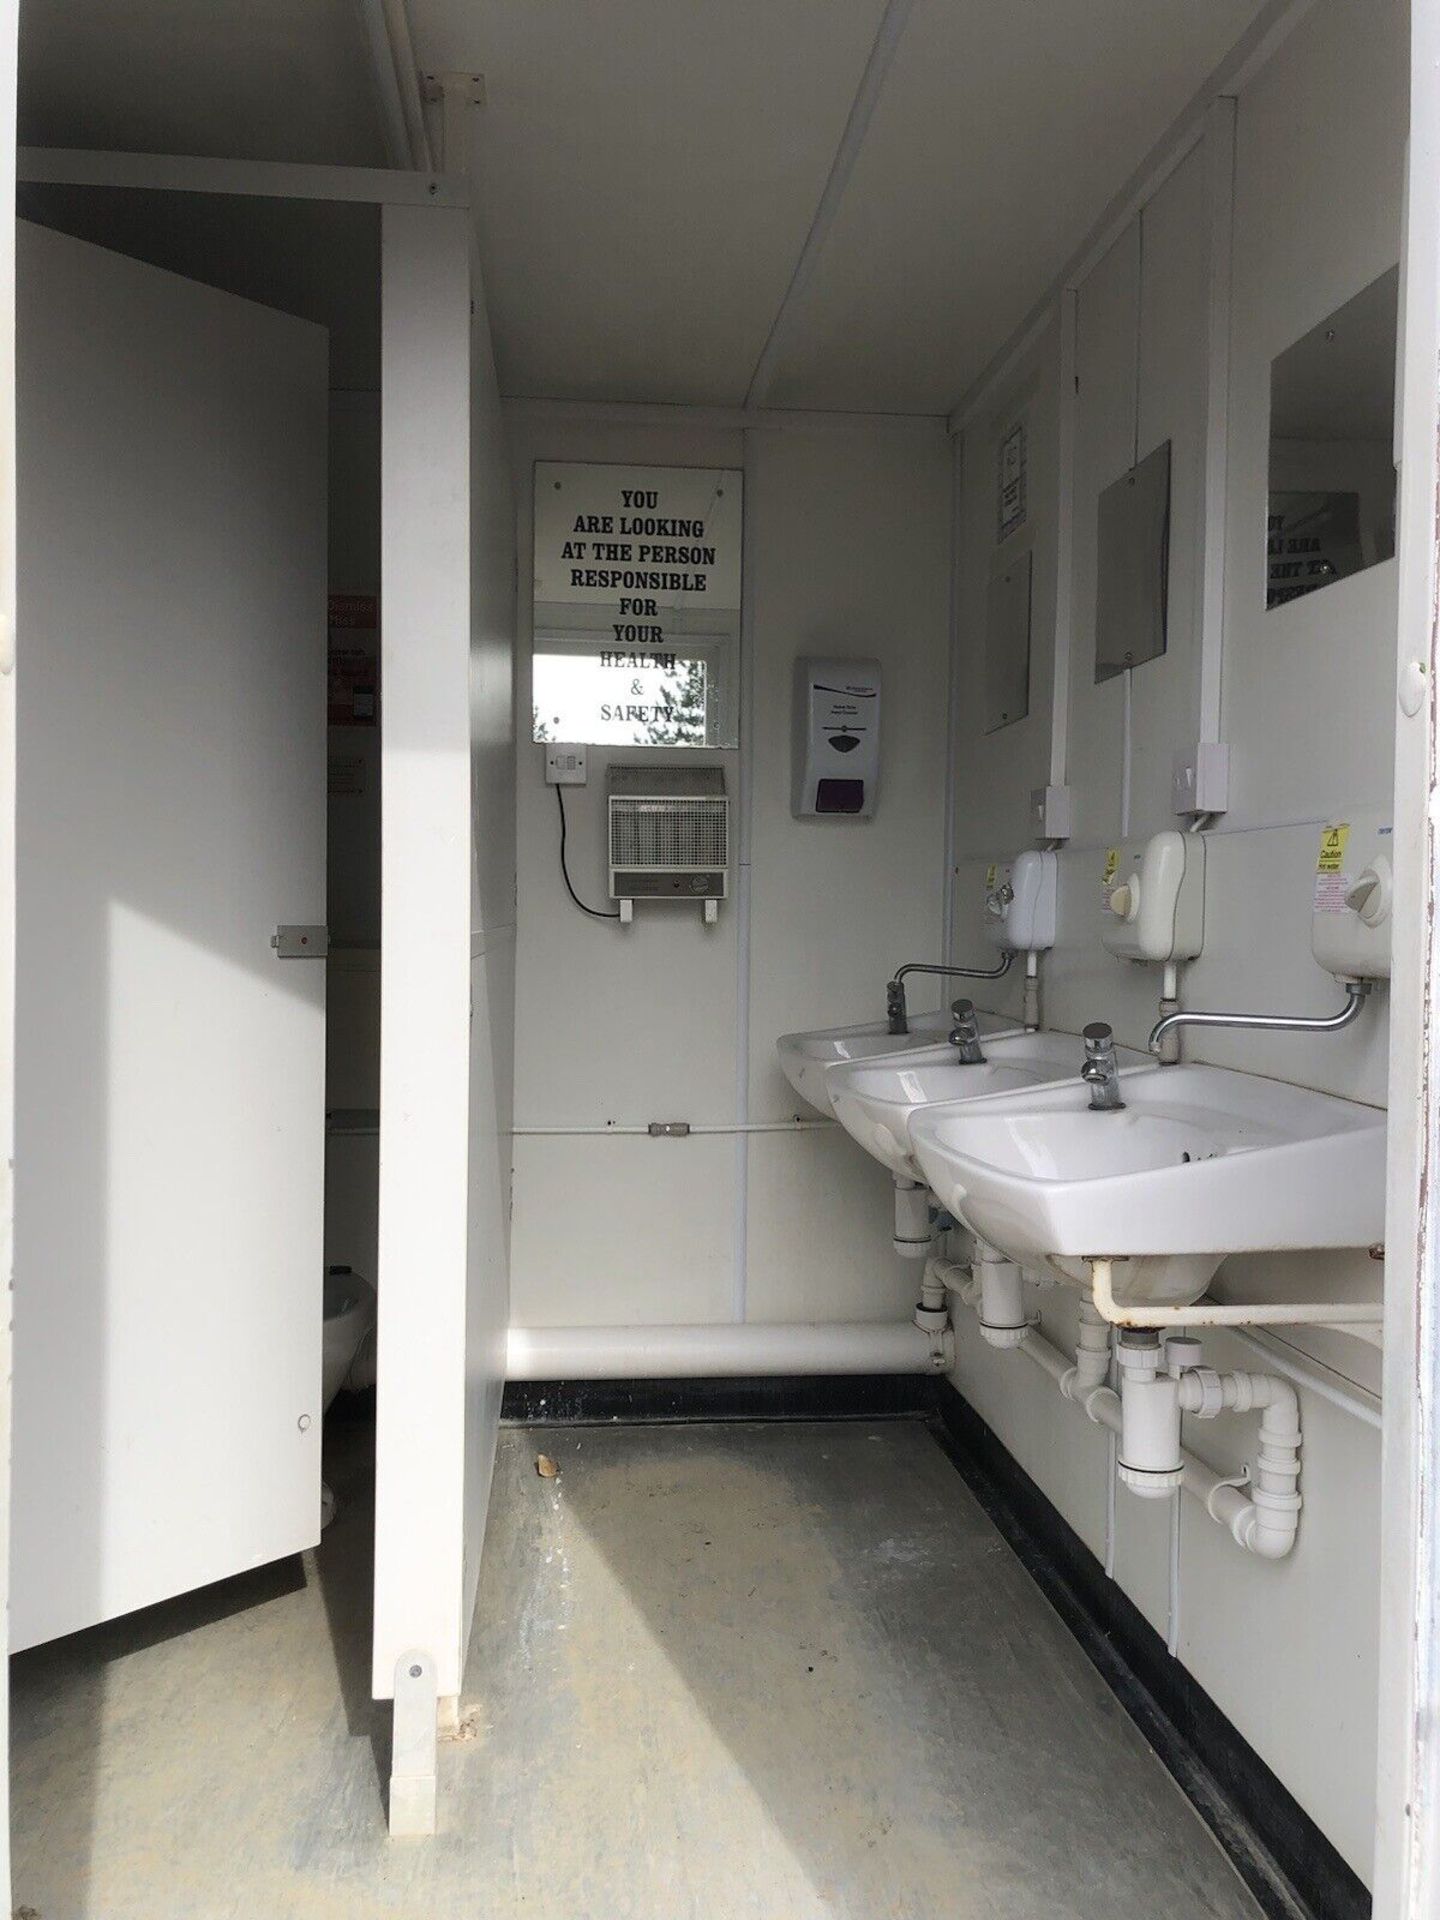 Portable Toilet Block With Shower Disabled Wheelch - Image 2 of 10